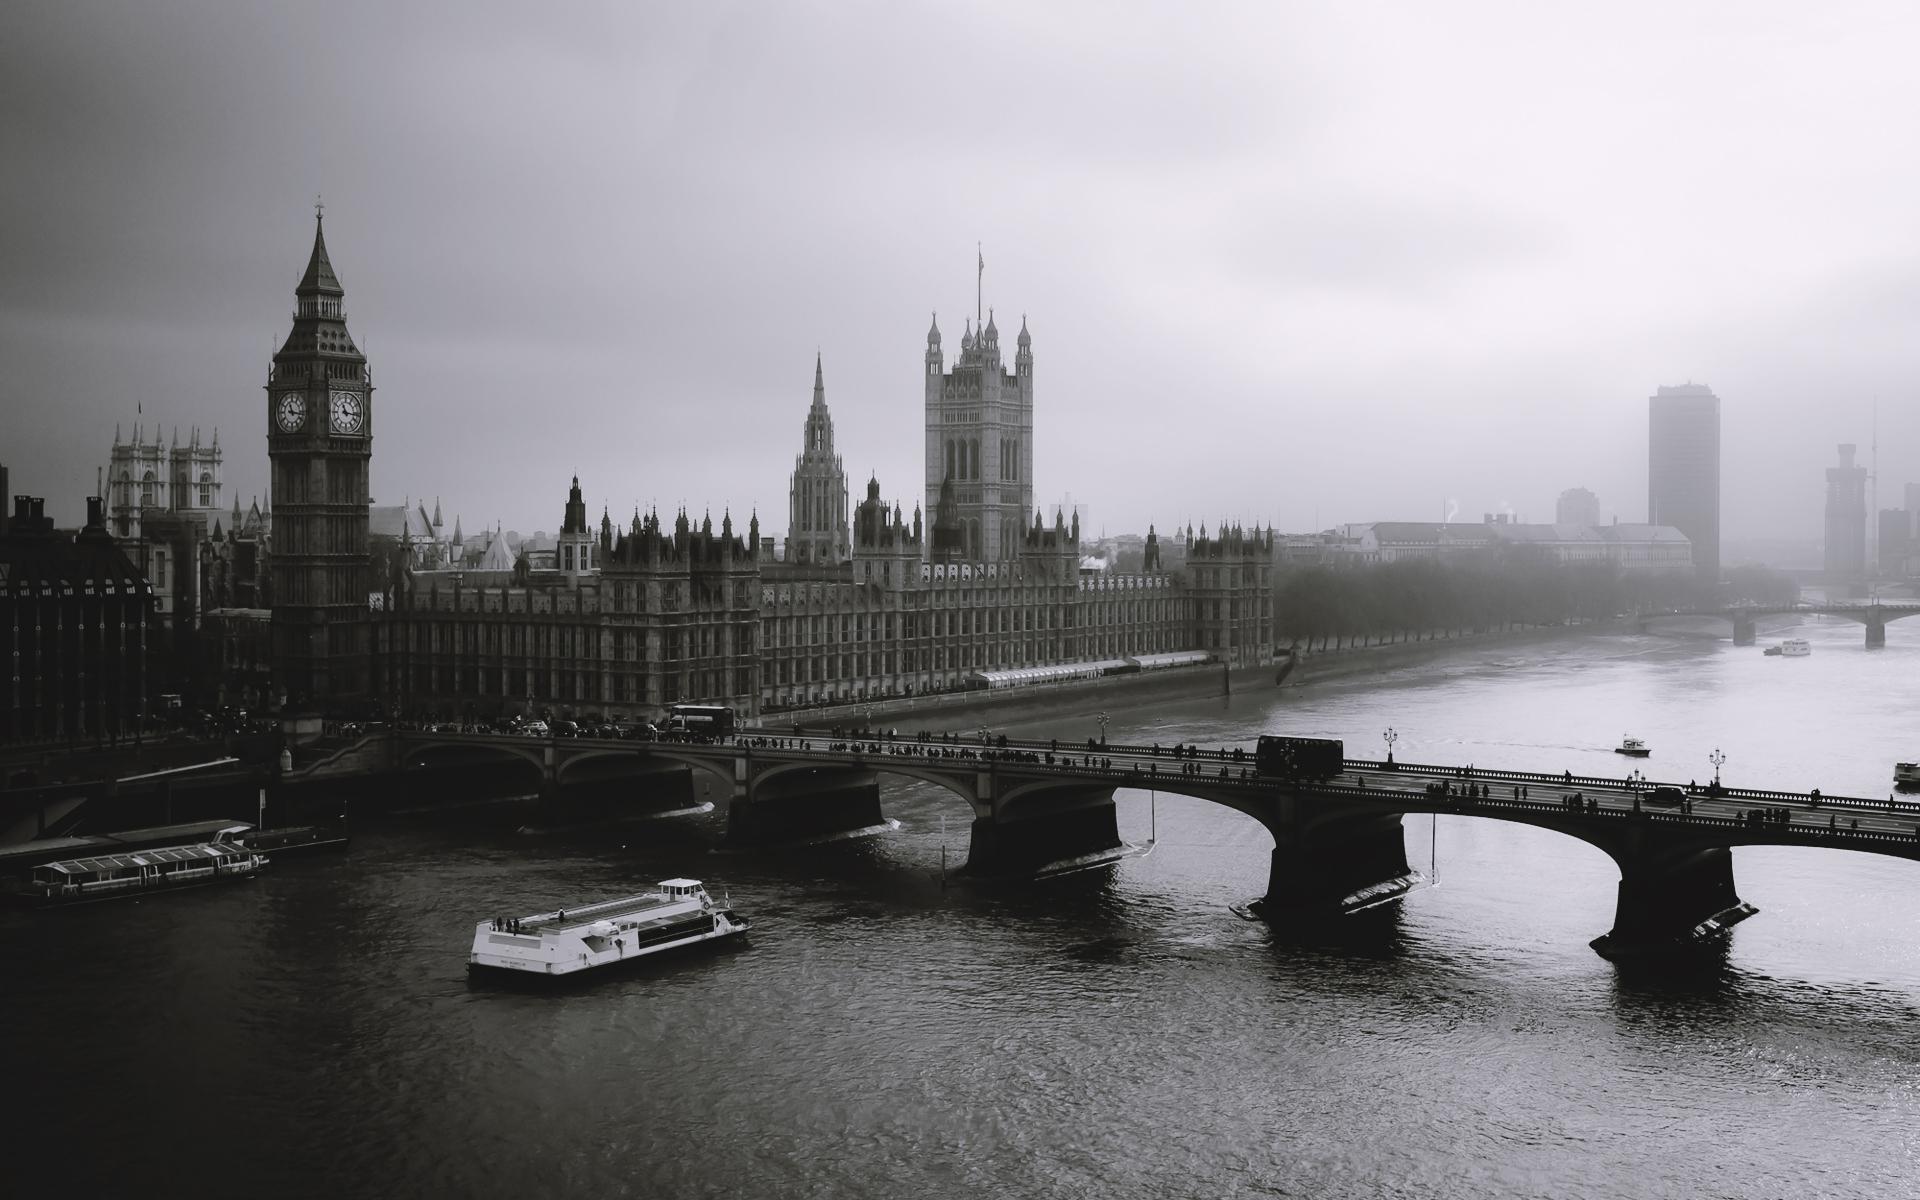 London Black And White Wallpapers